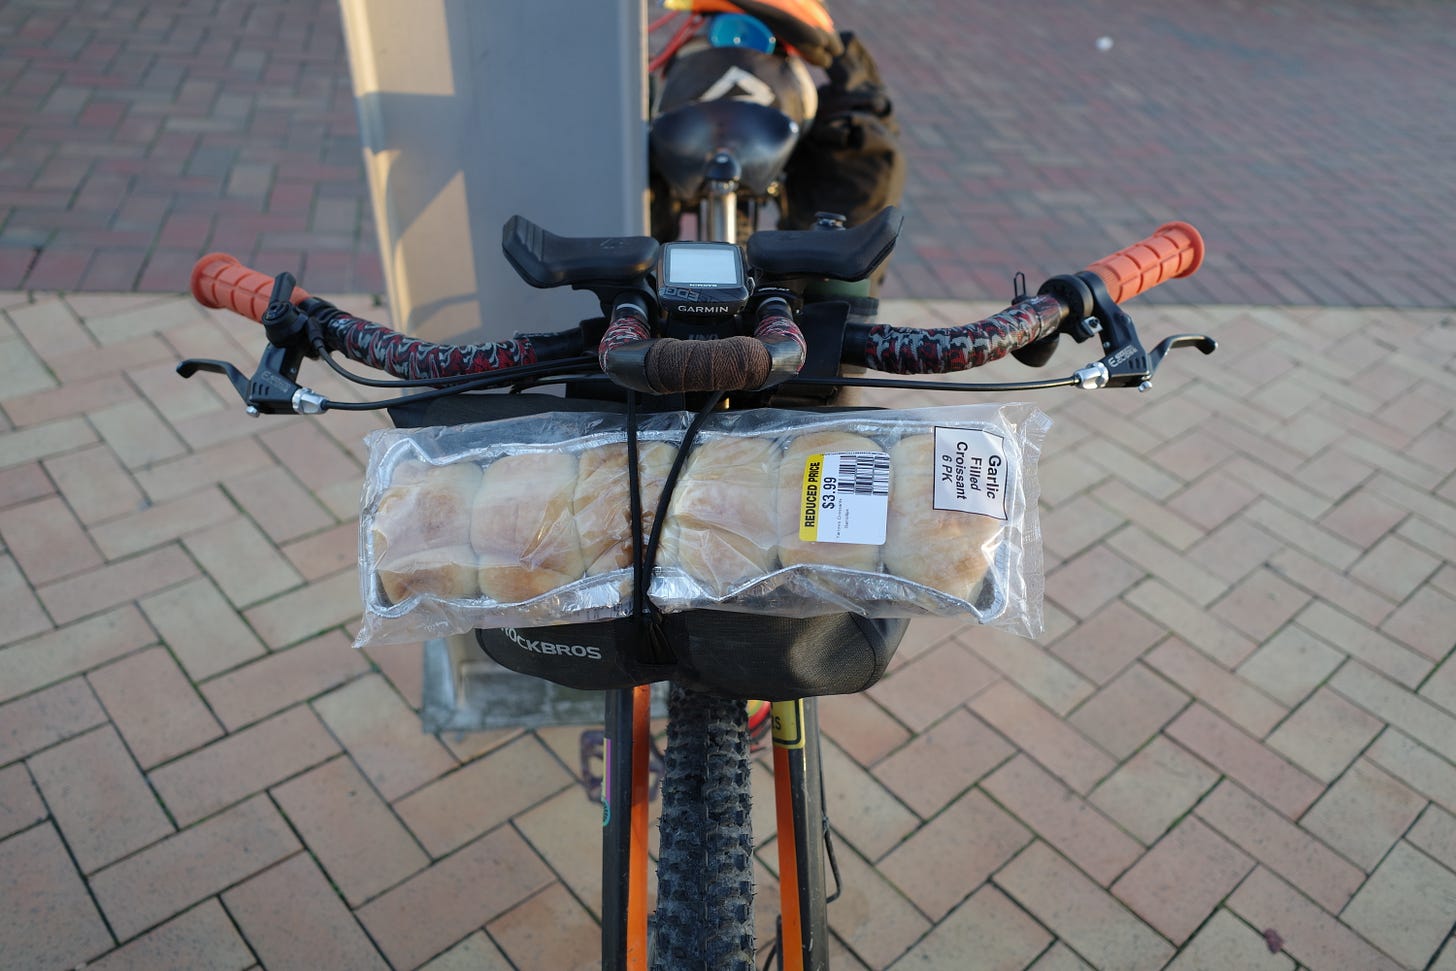 Robbie's bike with 6 garlic filled croissants strapped to the front